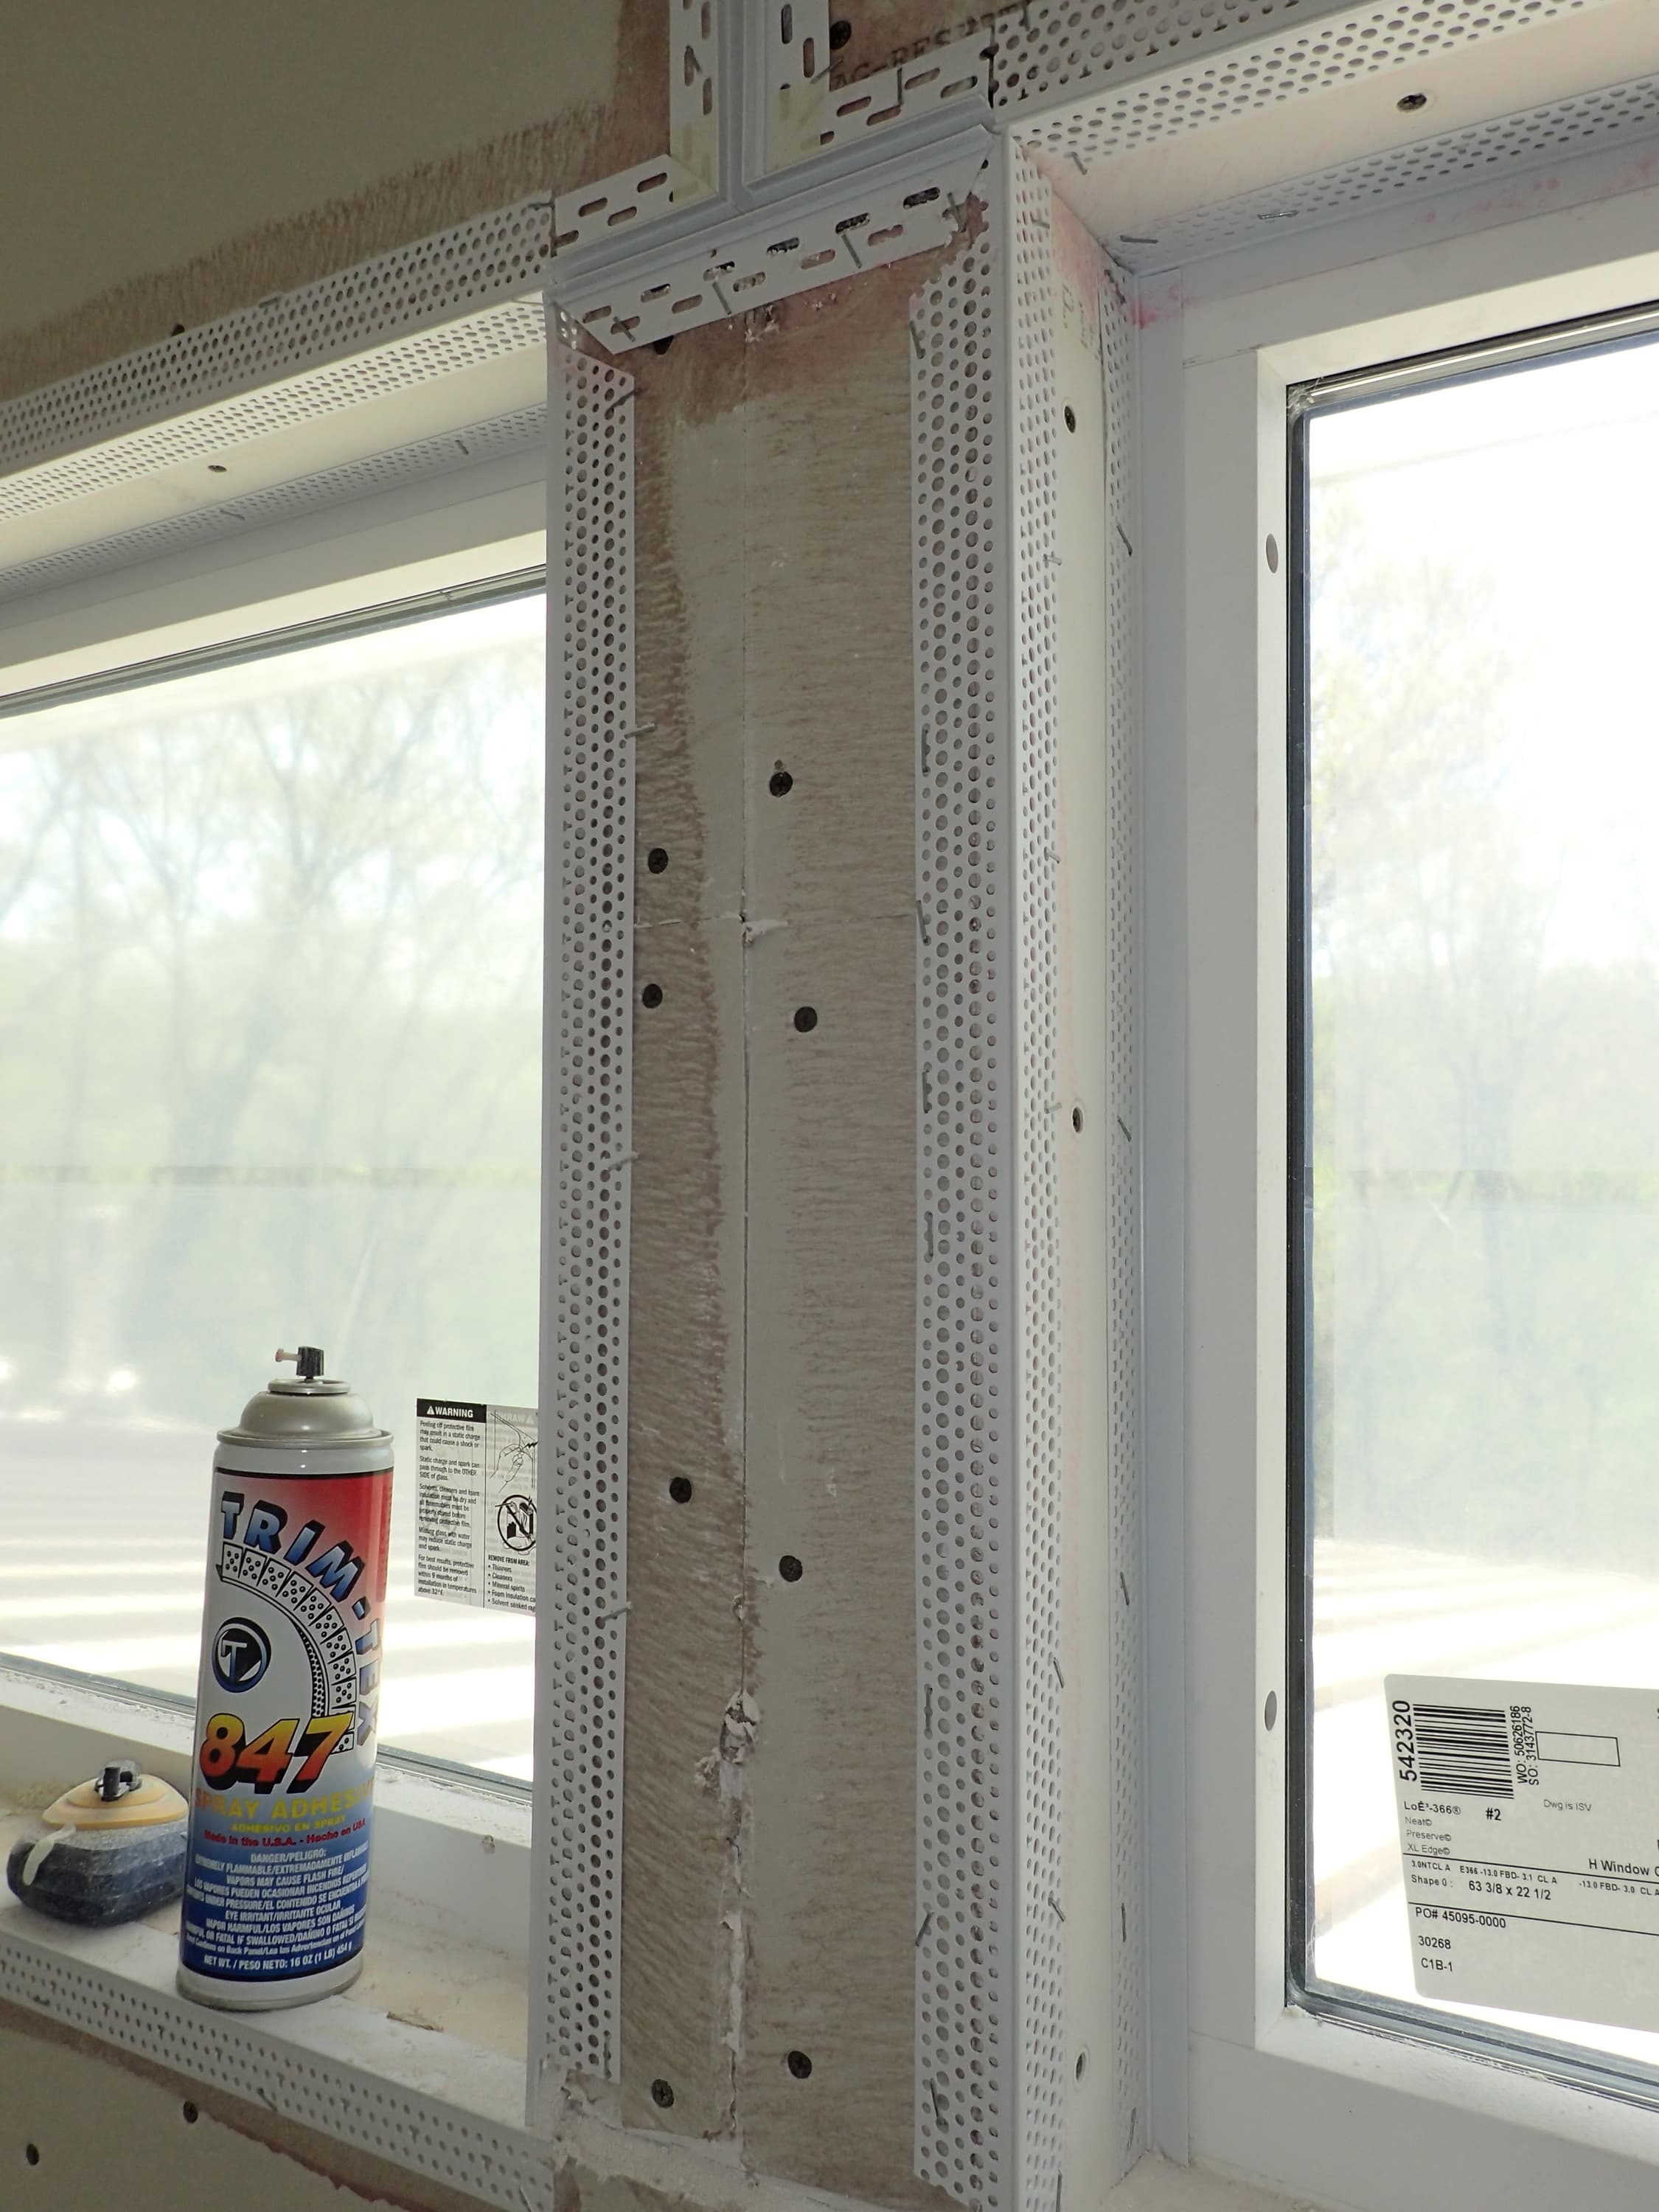 United Drywall installs all of their corner bead with 847 Spray Adhesive by Trim-Tex.